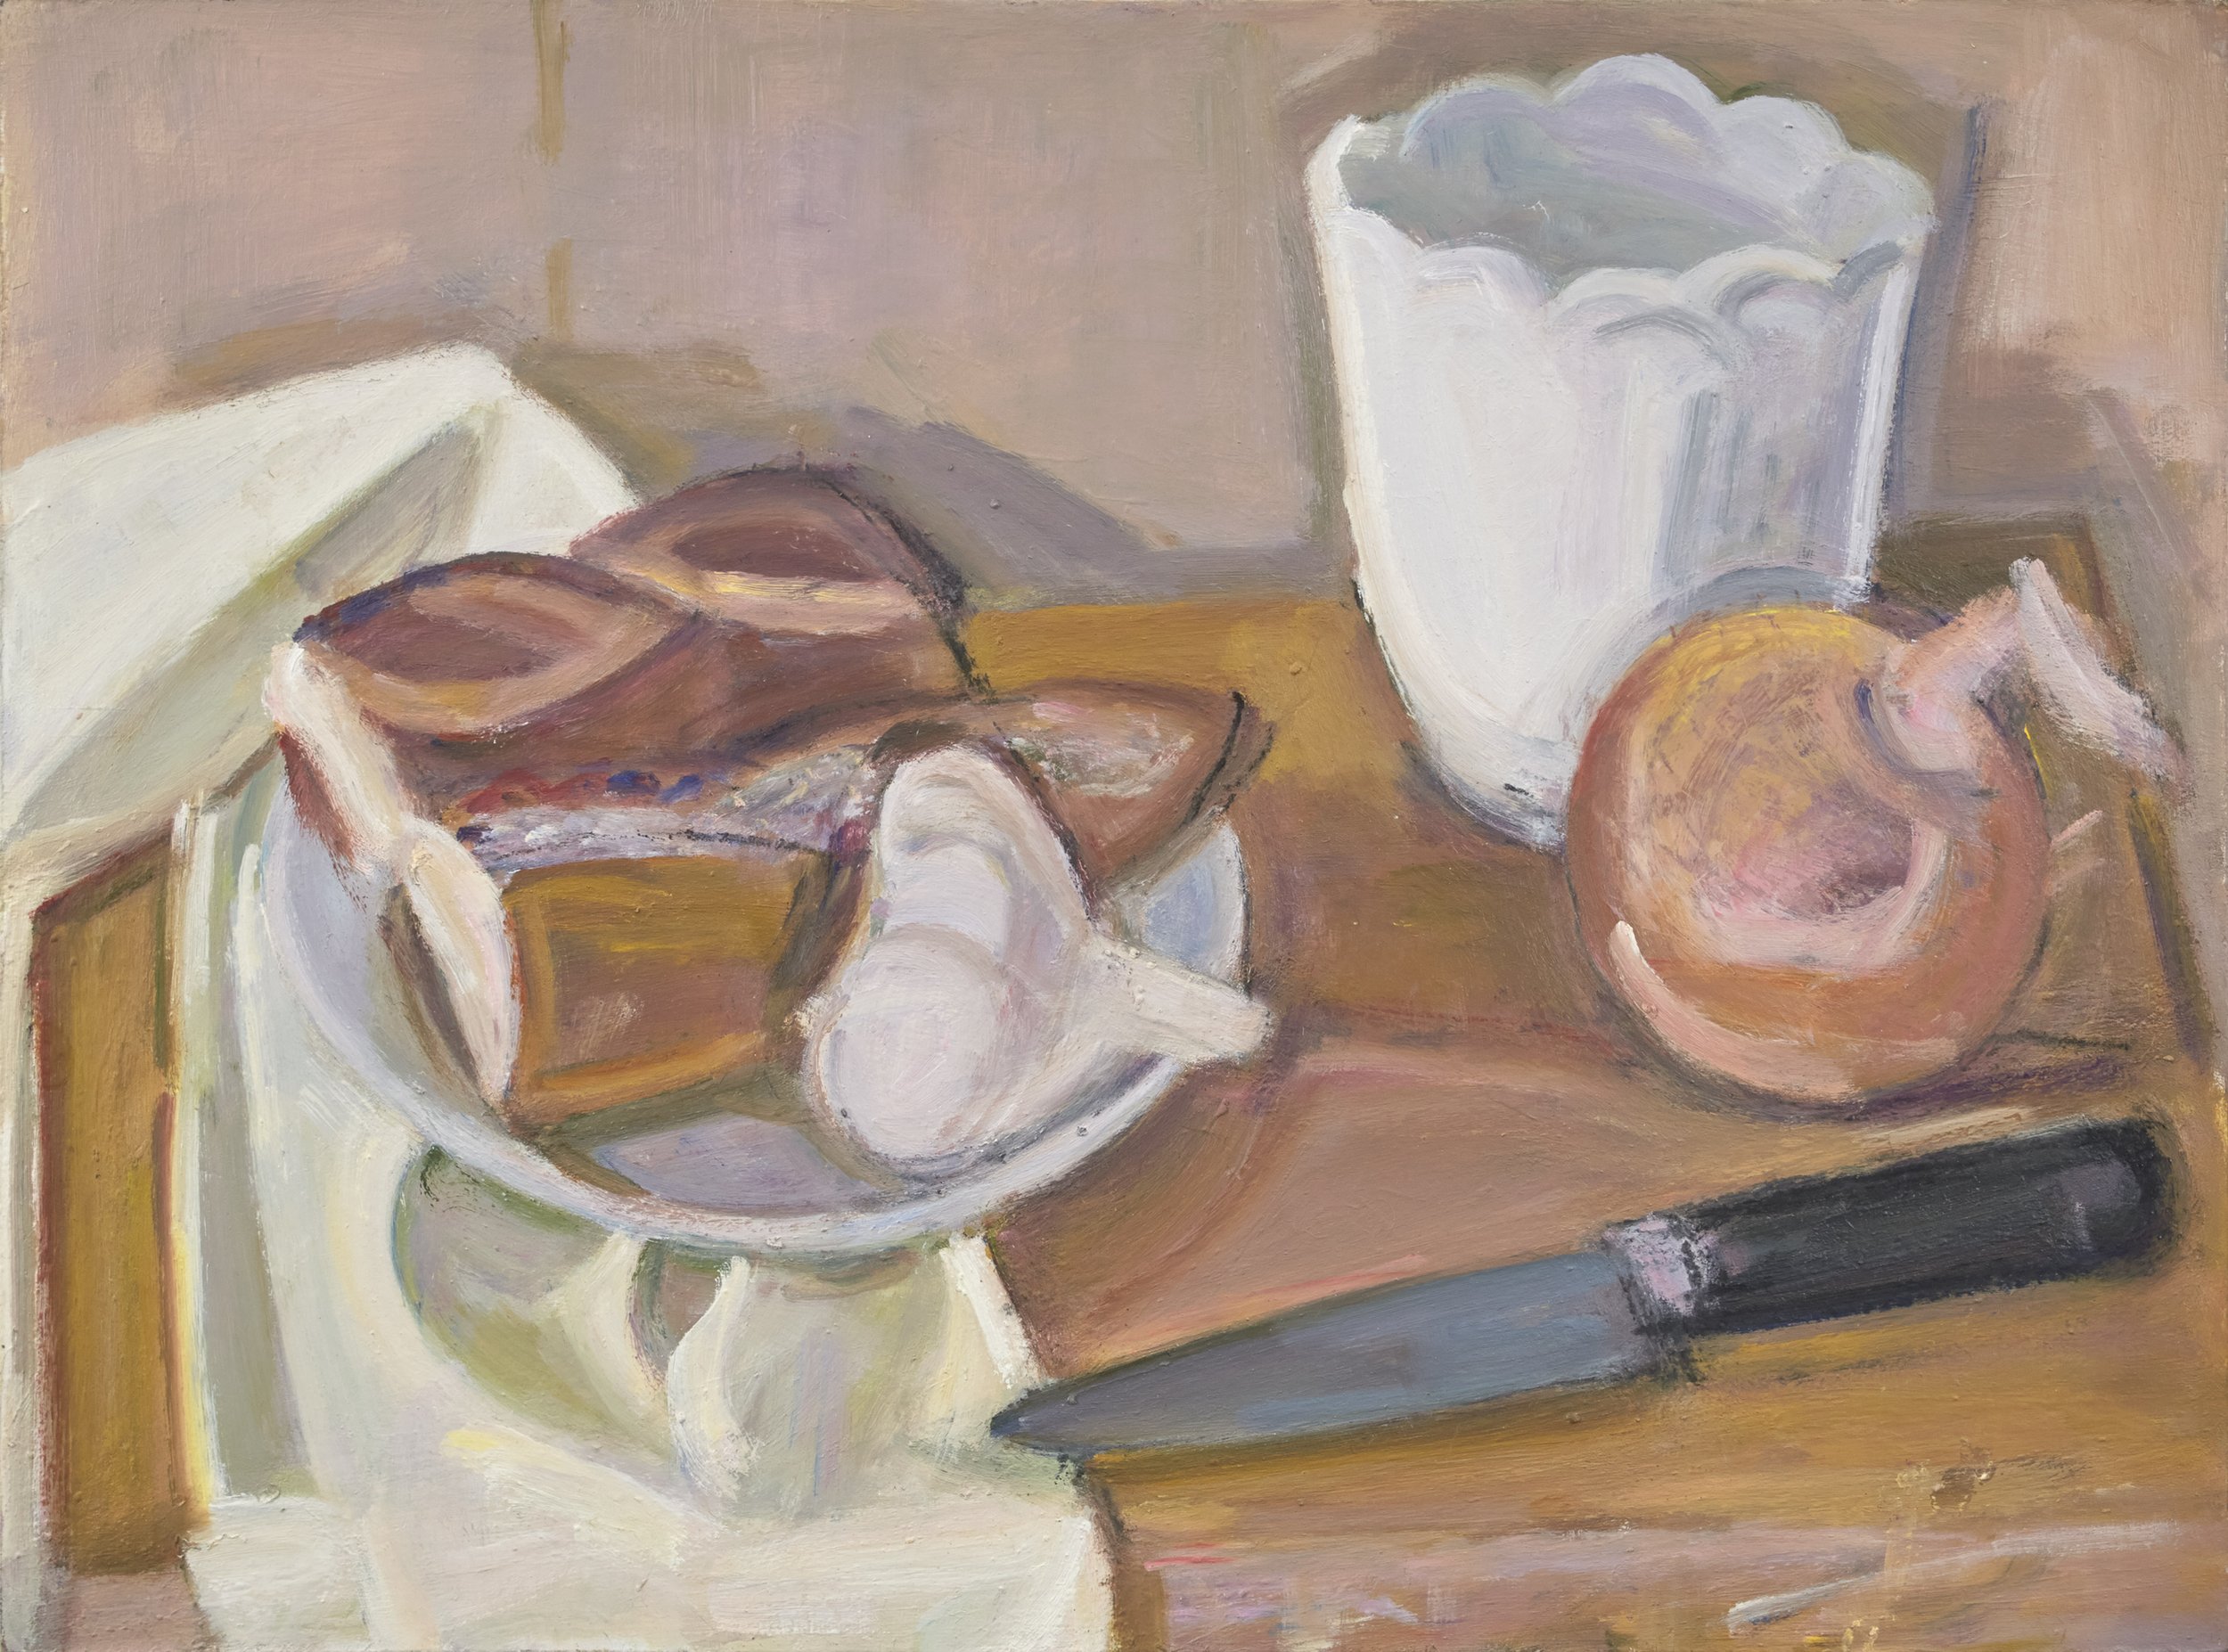   Still Life with Bread and Knife , 2020, oil/panel, 11 x 15 in. (Not for sale) 